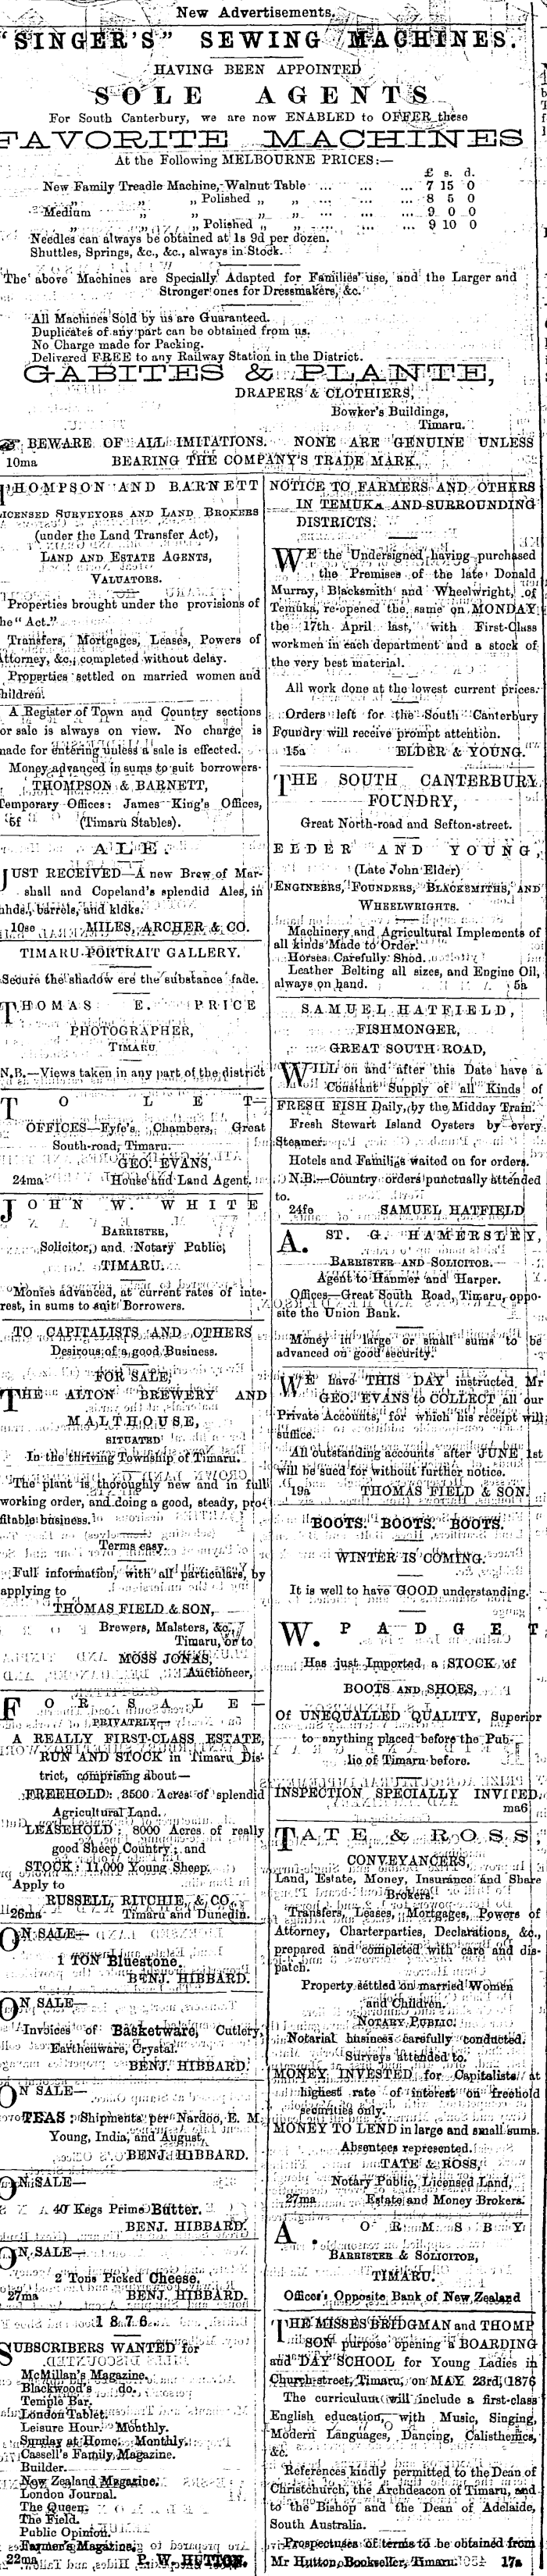 Papers Past Newspapers Timaru Herald 29 May 1876 Page 2 Advertisements Column 5